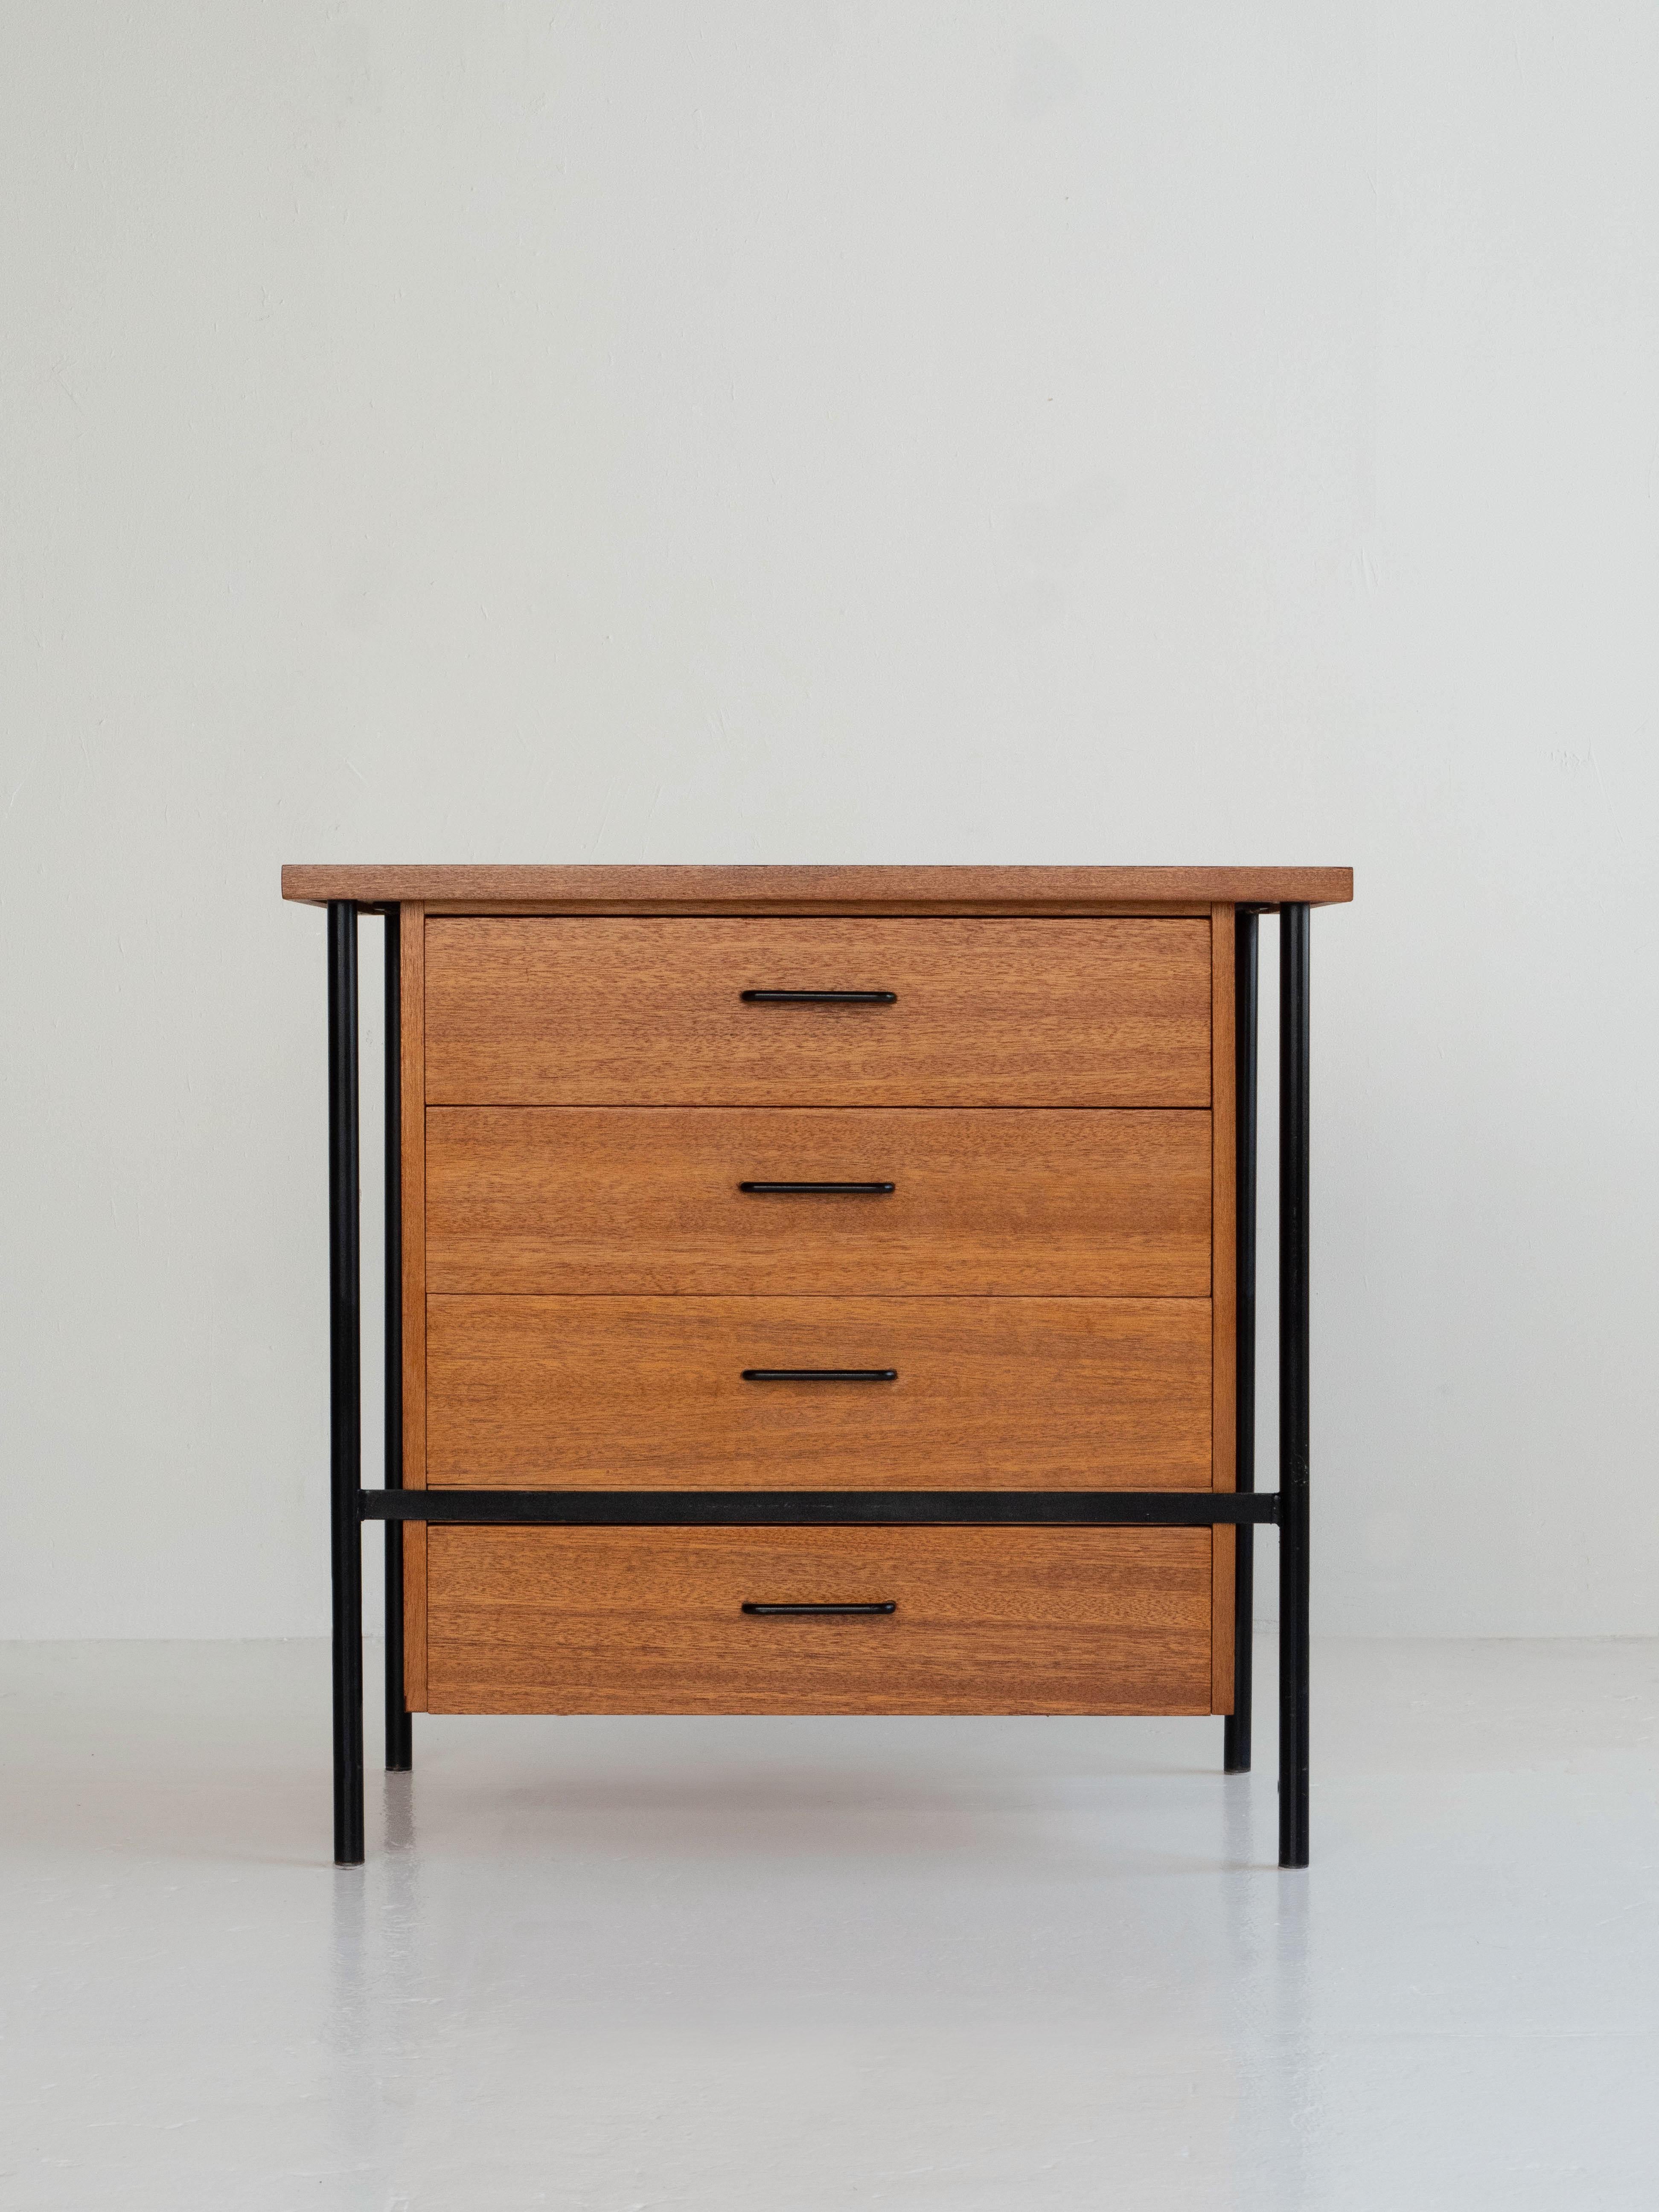 Mahogany four drawer dresser by designer Donald Knorr for Vista of California, circa 1950s. Very striking mahogany wood grain with a matte black tubular steel frame. 

This dresser is in very good original midcentury condition, only showing light